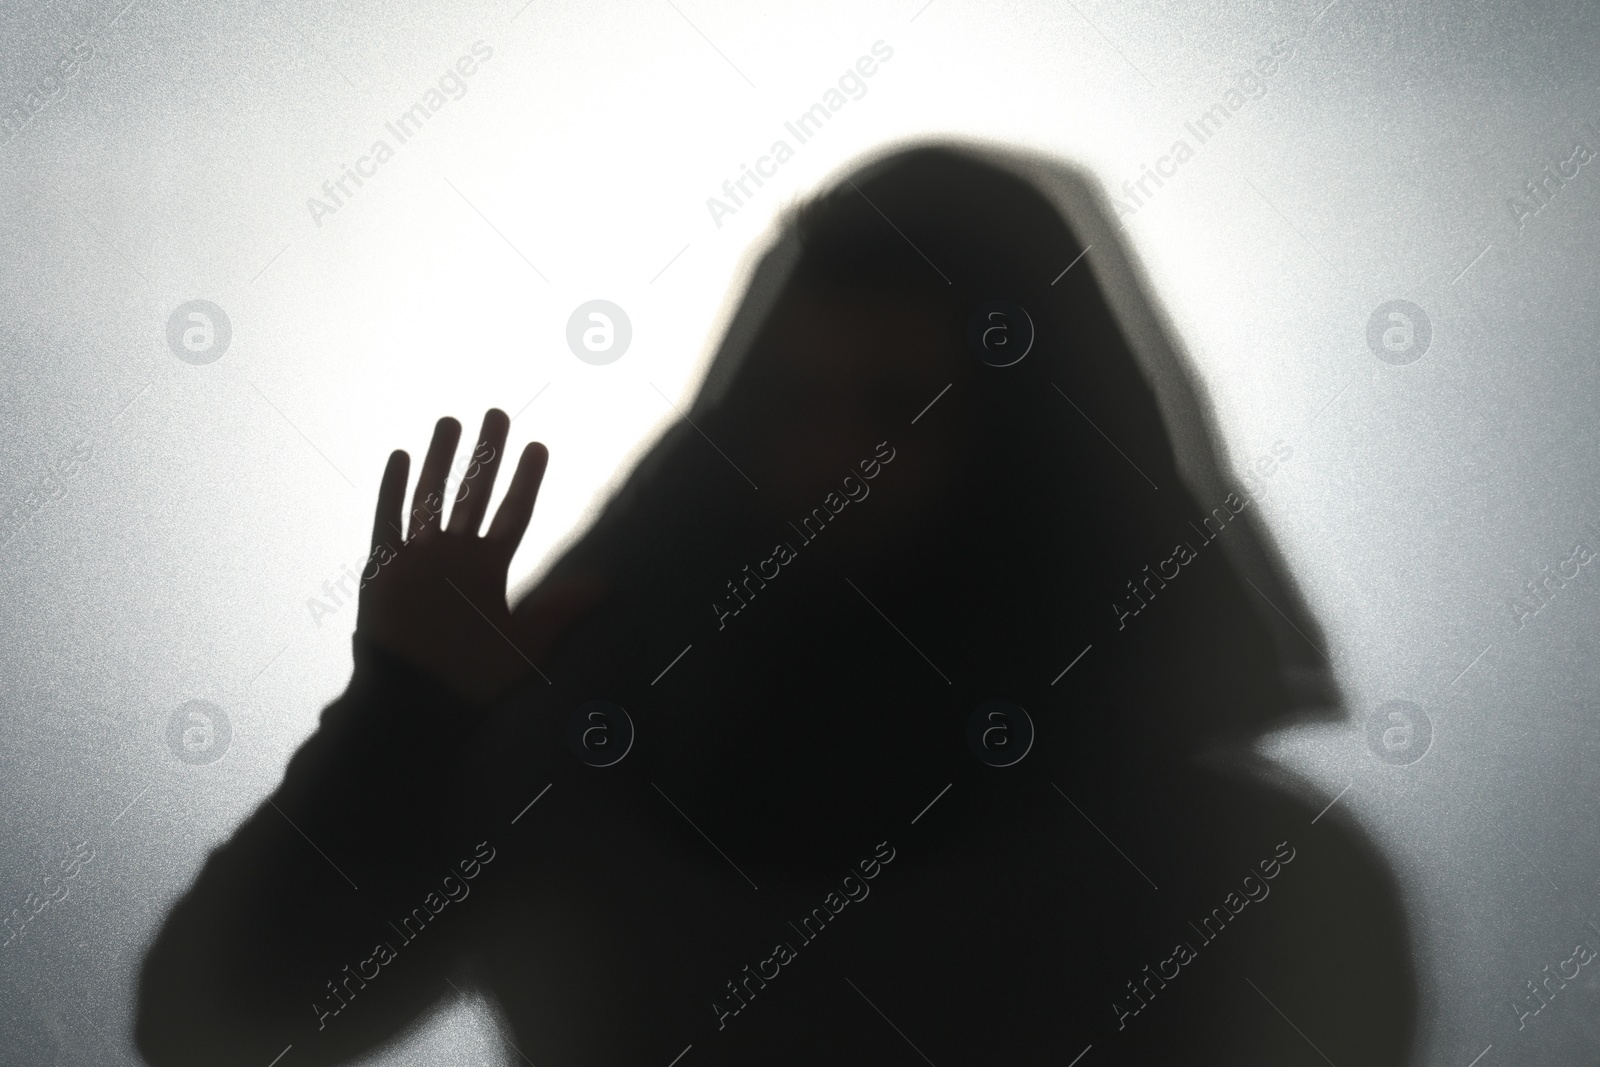 Photo of Silhouette of ghost behind glass against grey background